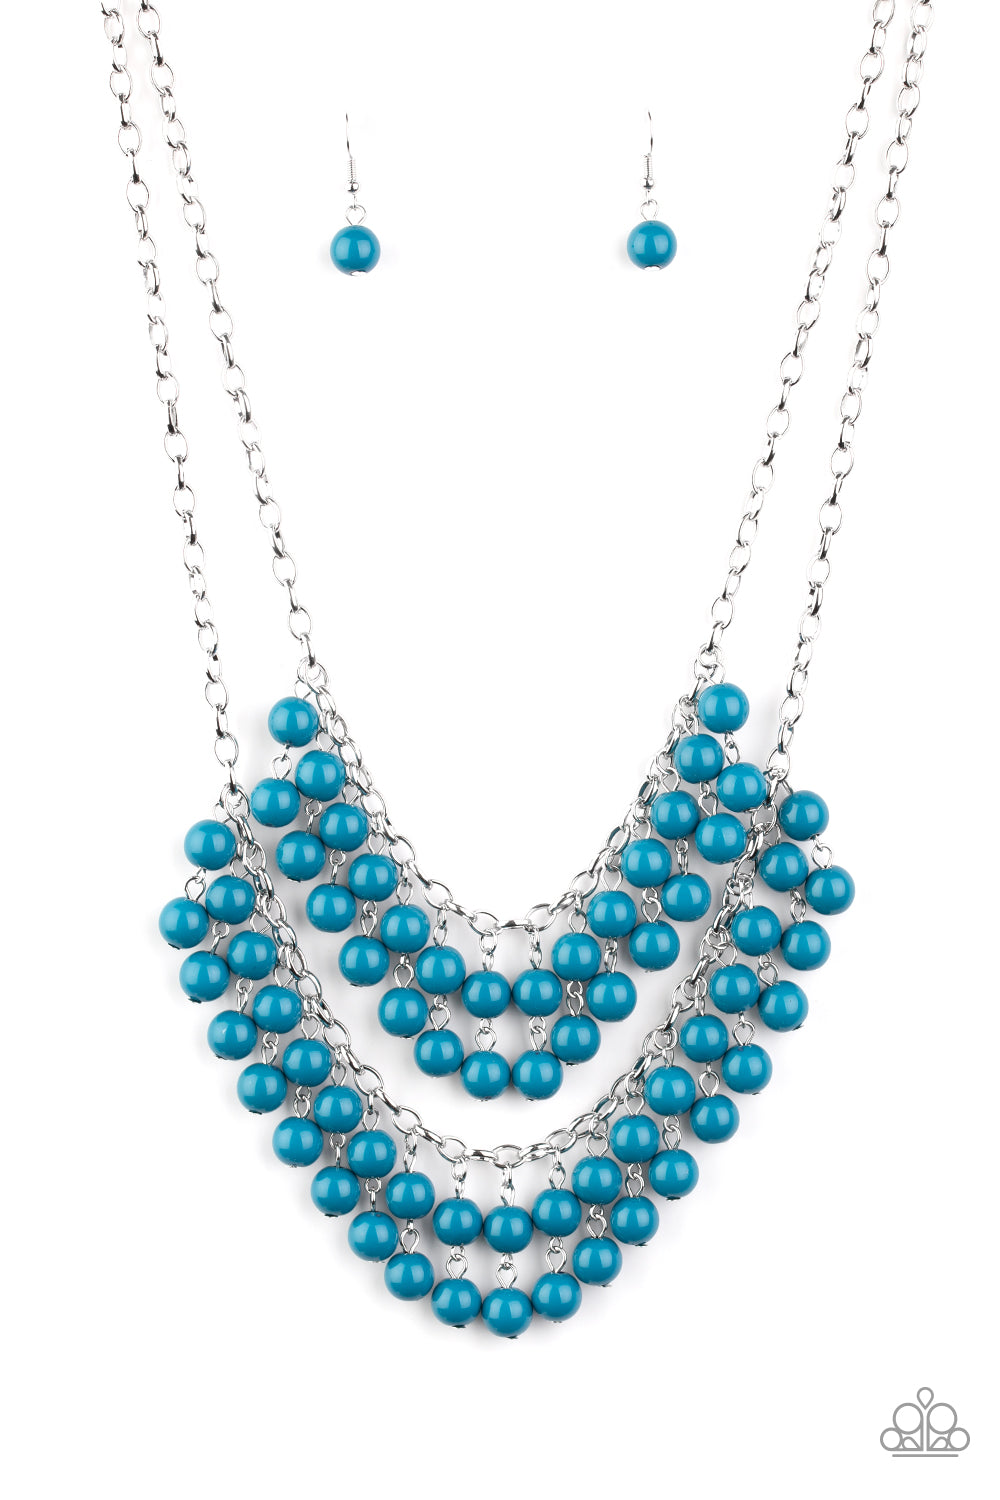 Paparazzi Accessories - Bubbly Boardwalk - Blue Necklace - Alies Bling Bar